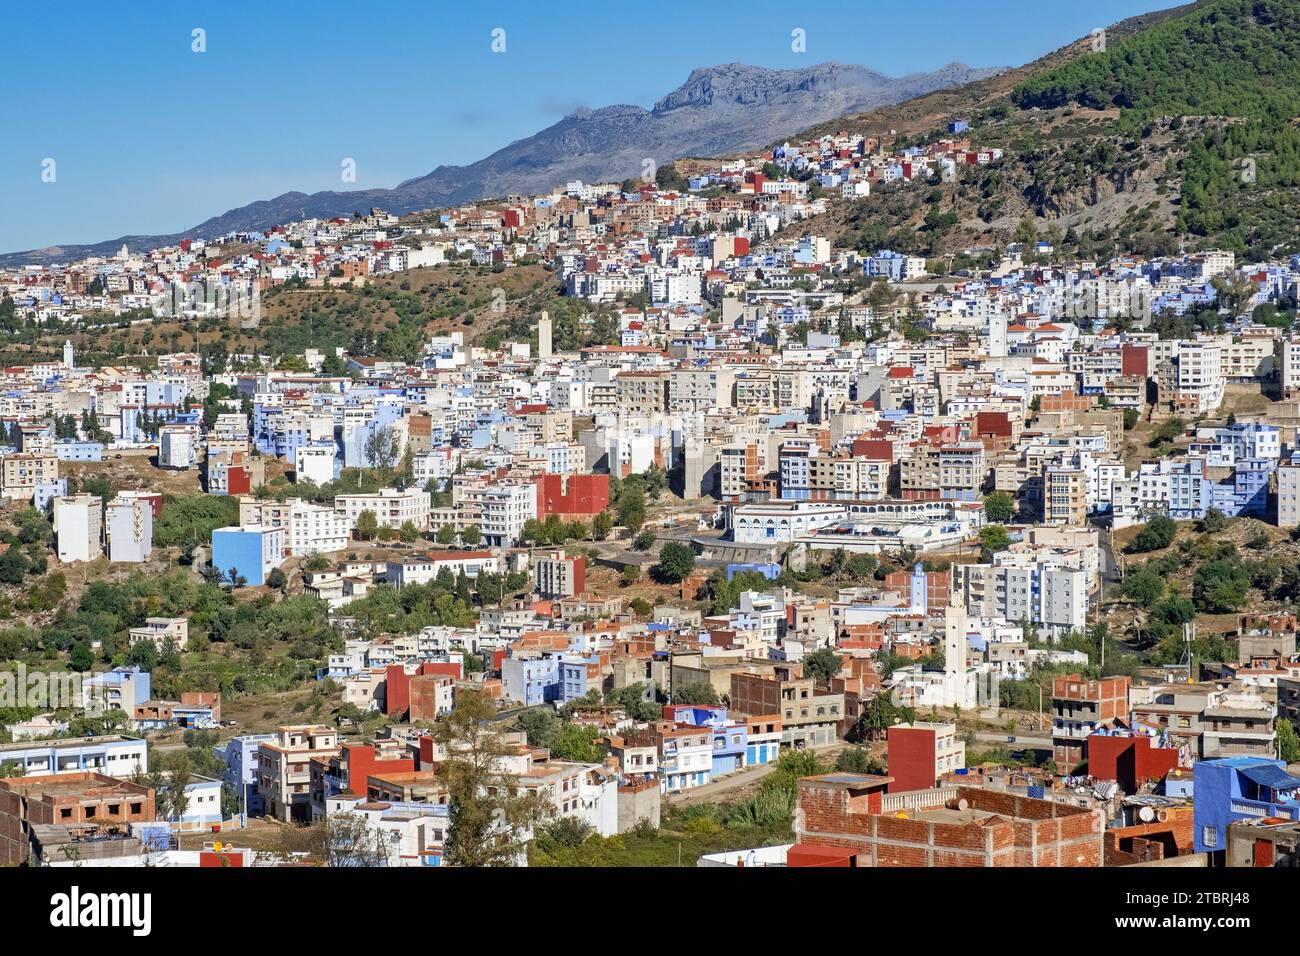 Aerial view over the city Chefchaouen / Chaouen, Tanger-Tetouan-Al Hoceima, Morocco Stock Photo